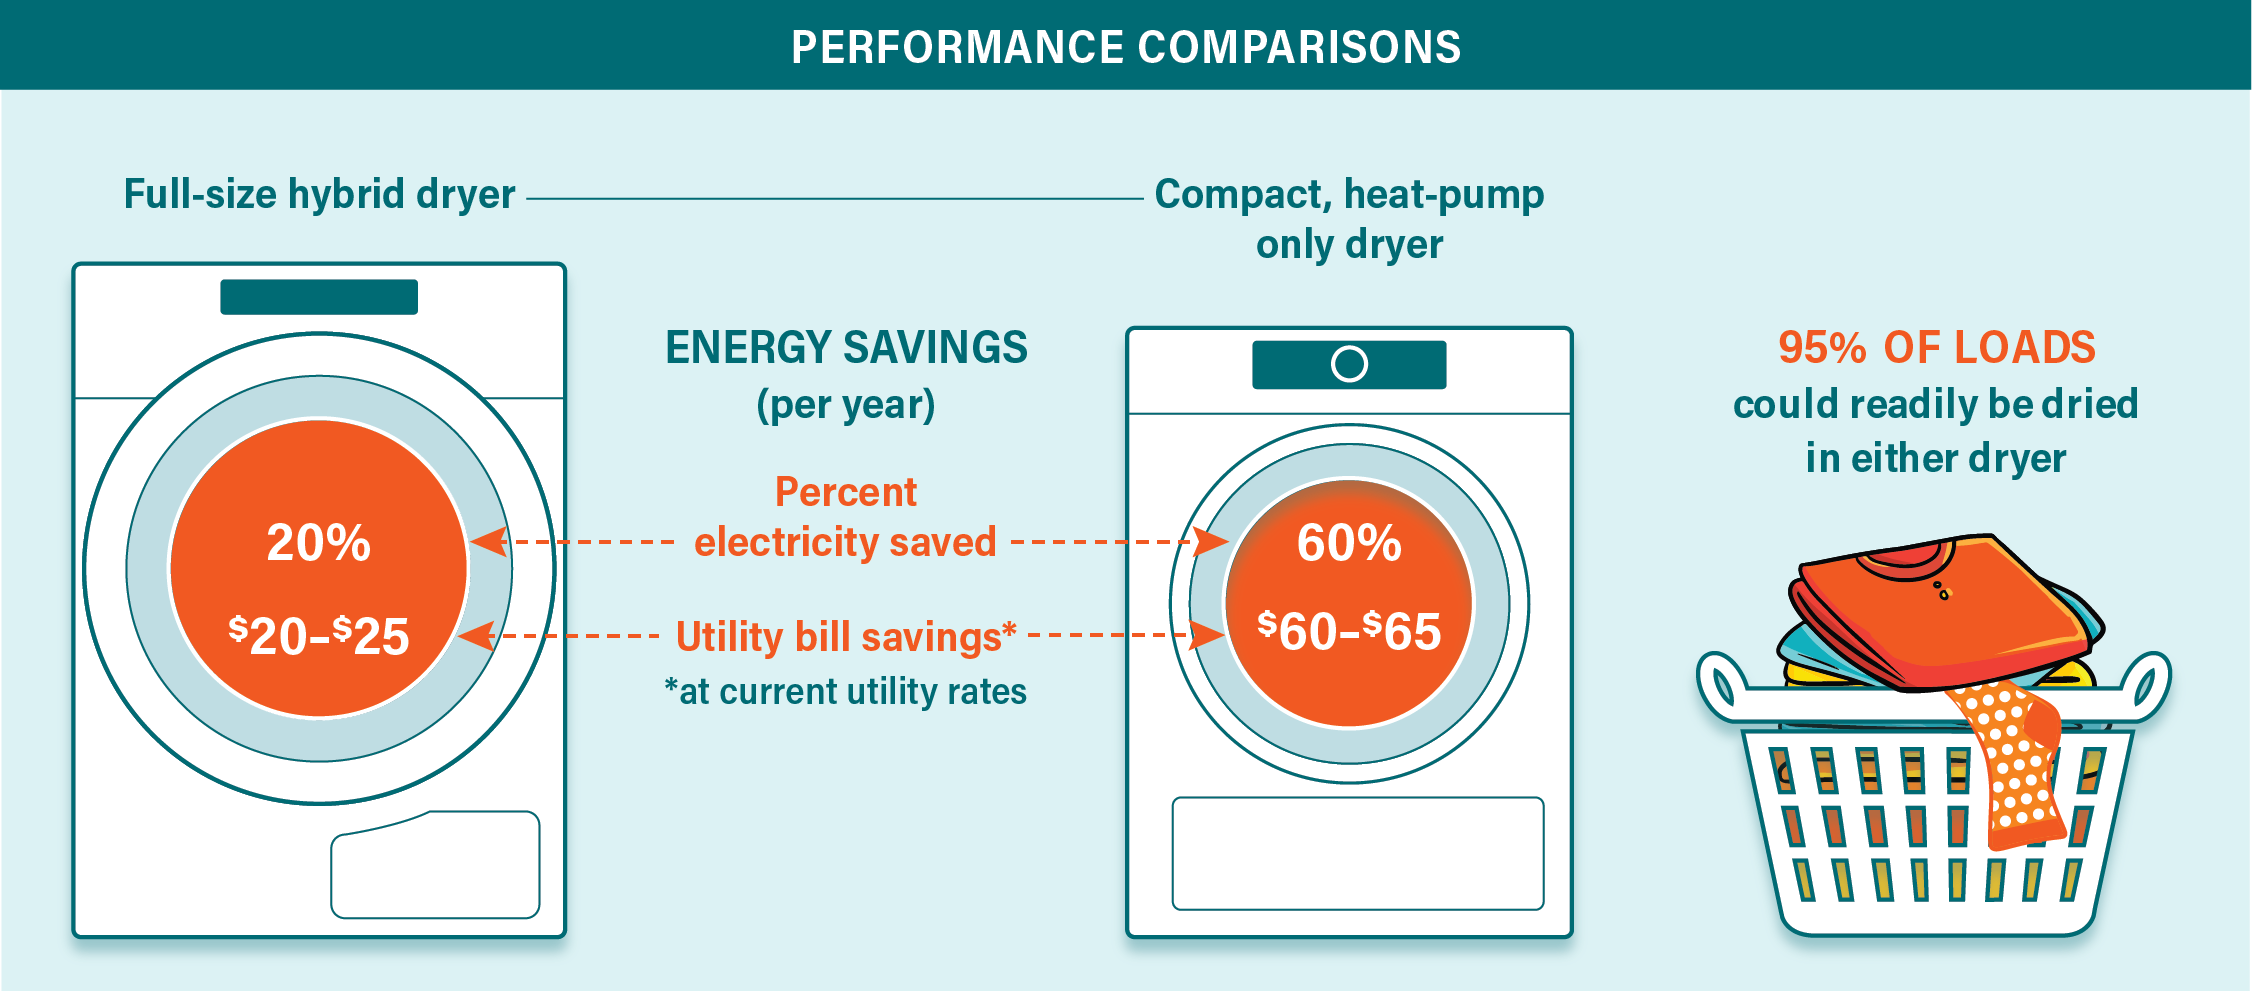 An infographic comparing the performance of heat pump clothes dryers